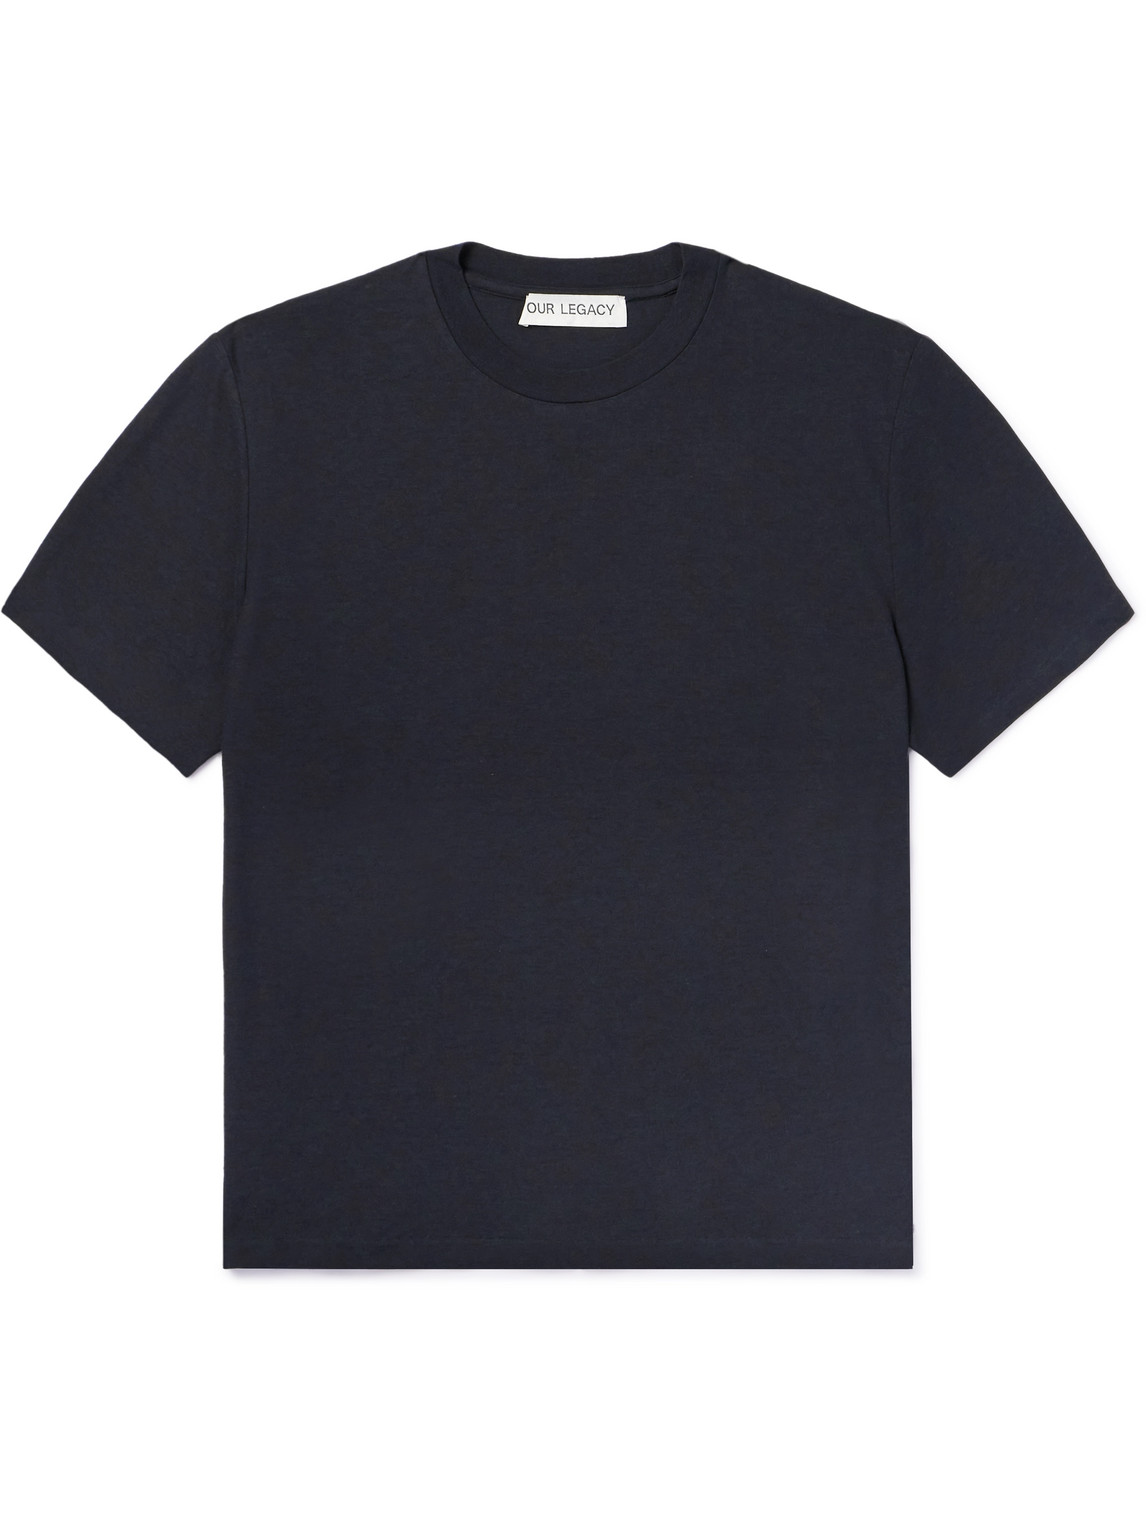 Our Legacy Hover Cotton-jersey T-shirt In Black